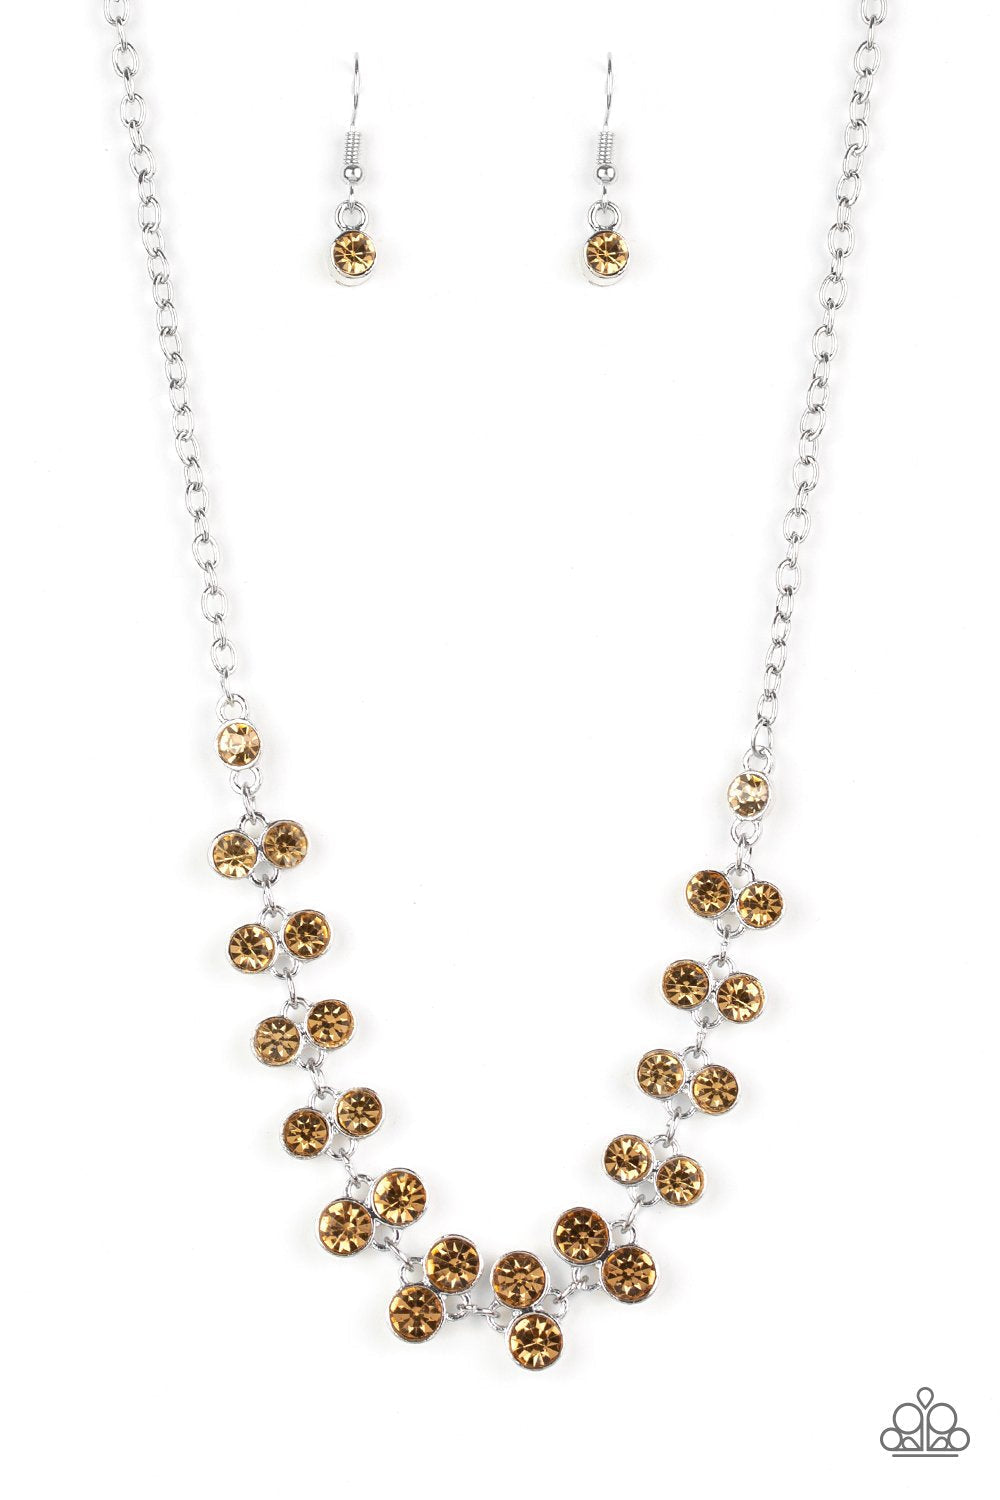 Super Starstruck - Golden Topaz Necklace - Paparazzi Accessories - Golden topaz rhinestones below the collar of silver chain for a timeless look necklace. Features an adjustable clasp closure.